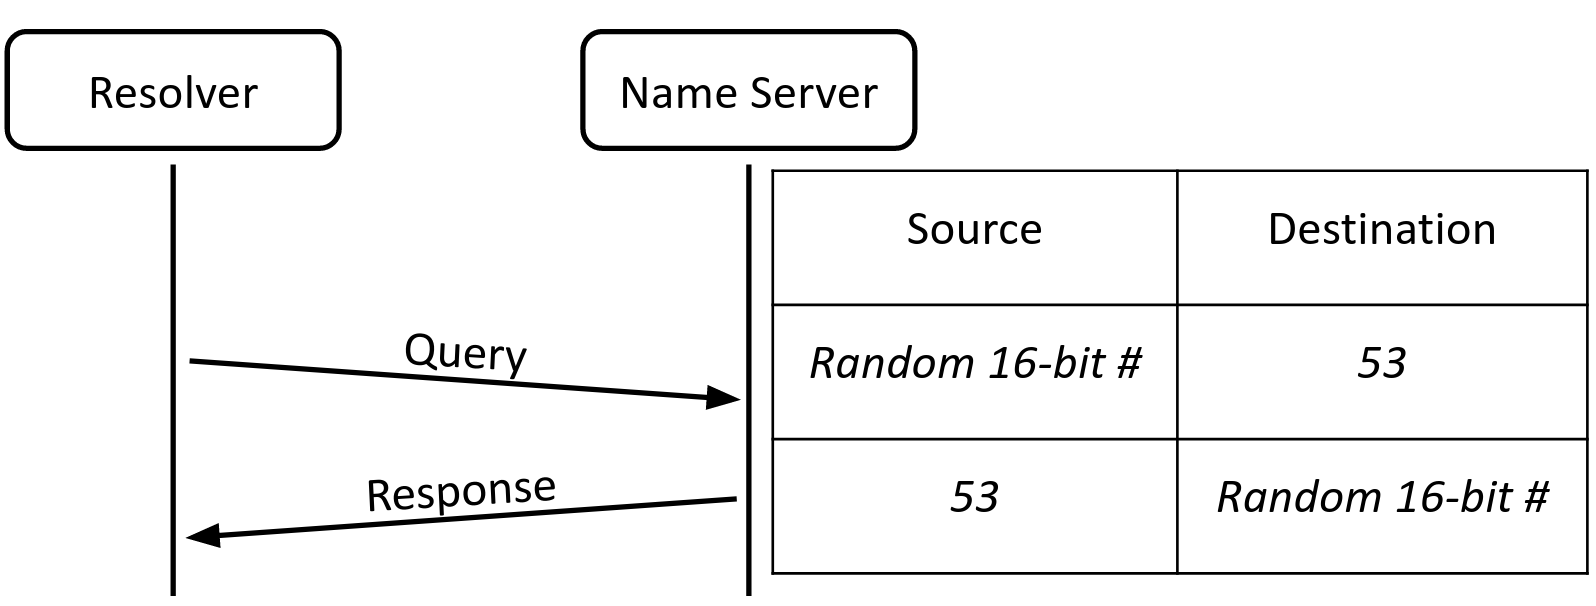 Diagram of source port randomization in use. The query's source port is randomized, and the destination port is 53. The response's source port is 53, and the destination port is the same randomized value